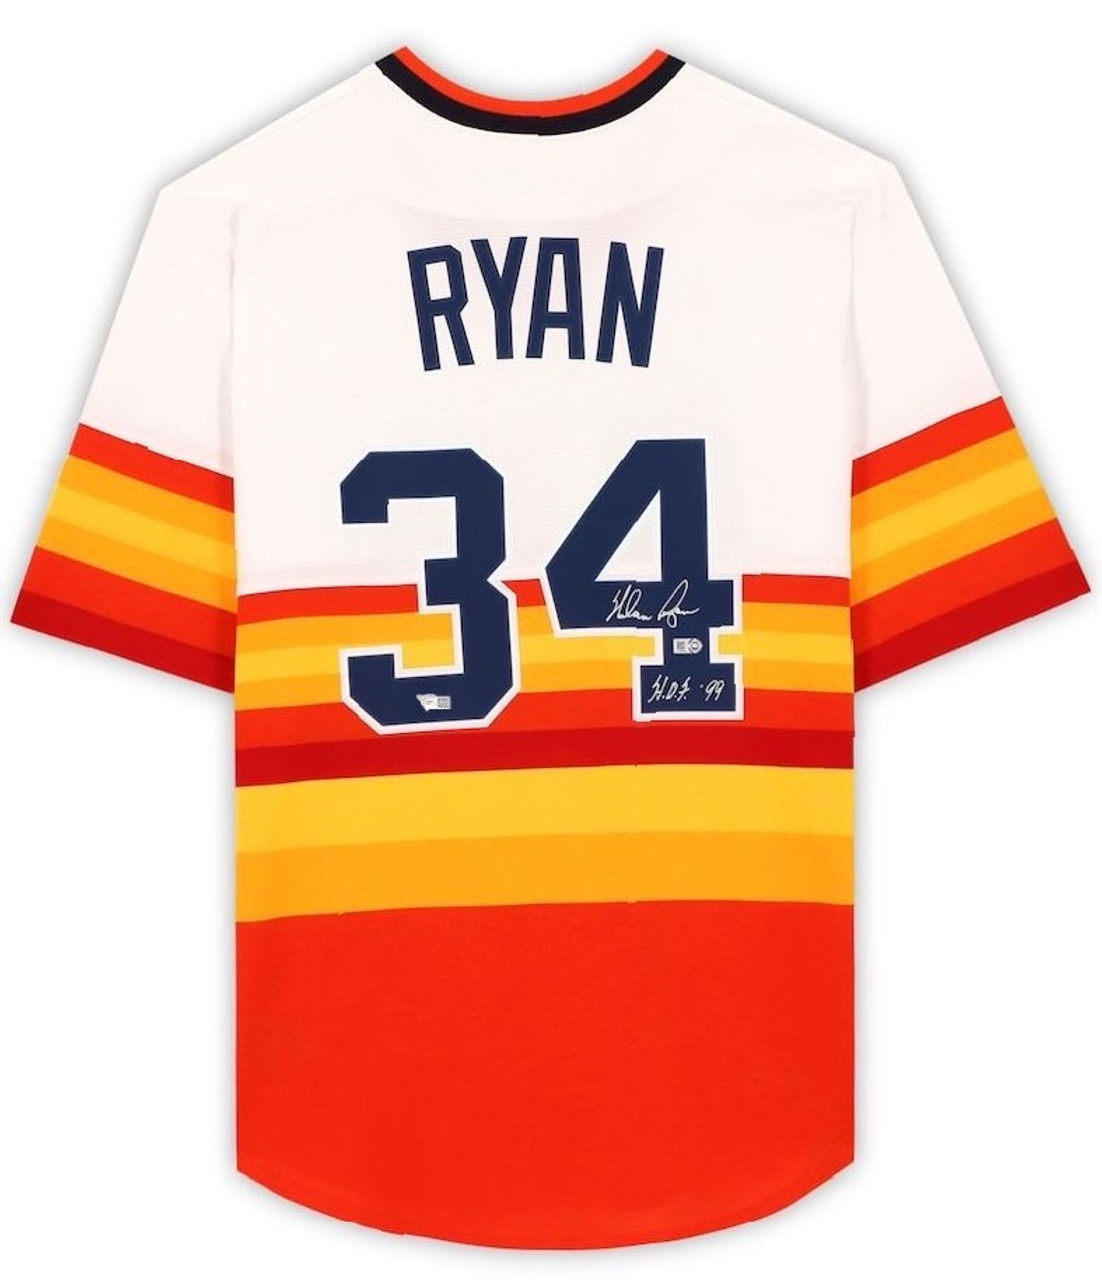 Nolan Ryan Signed Astros Jersey with Multiple Inscriptions (Beckett)